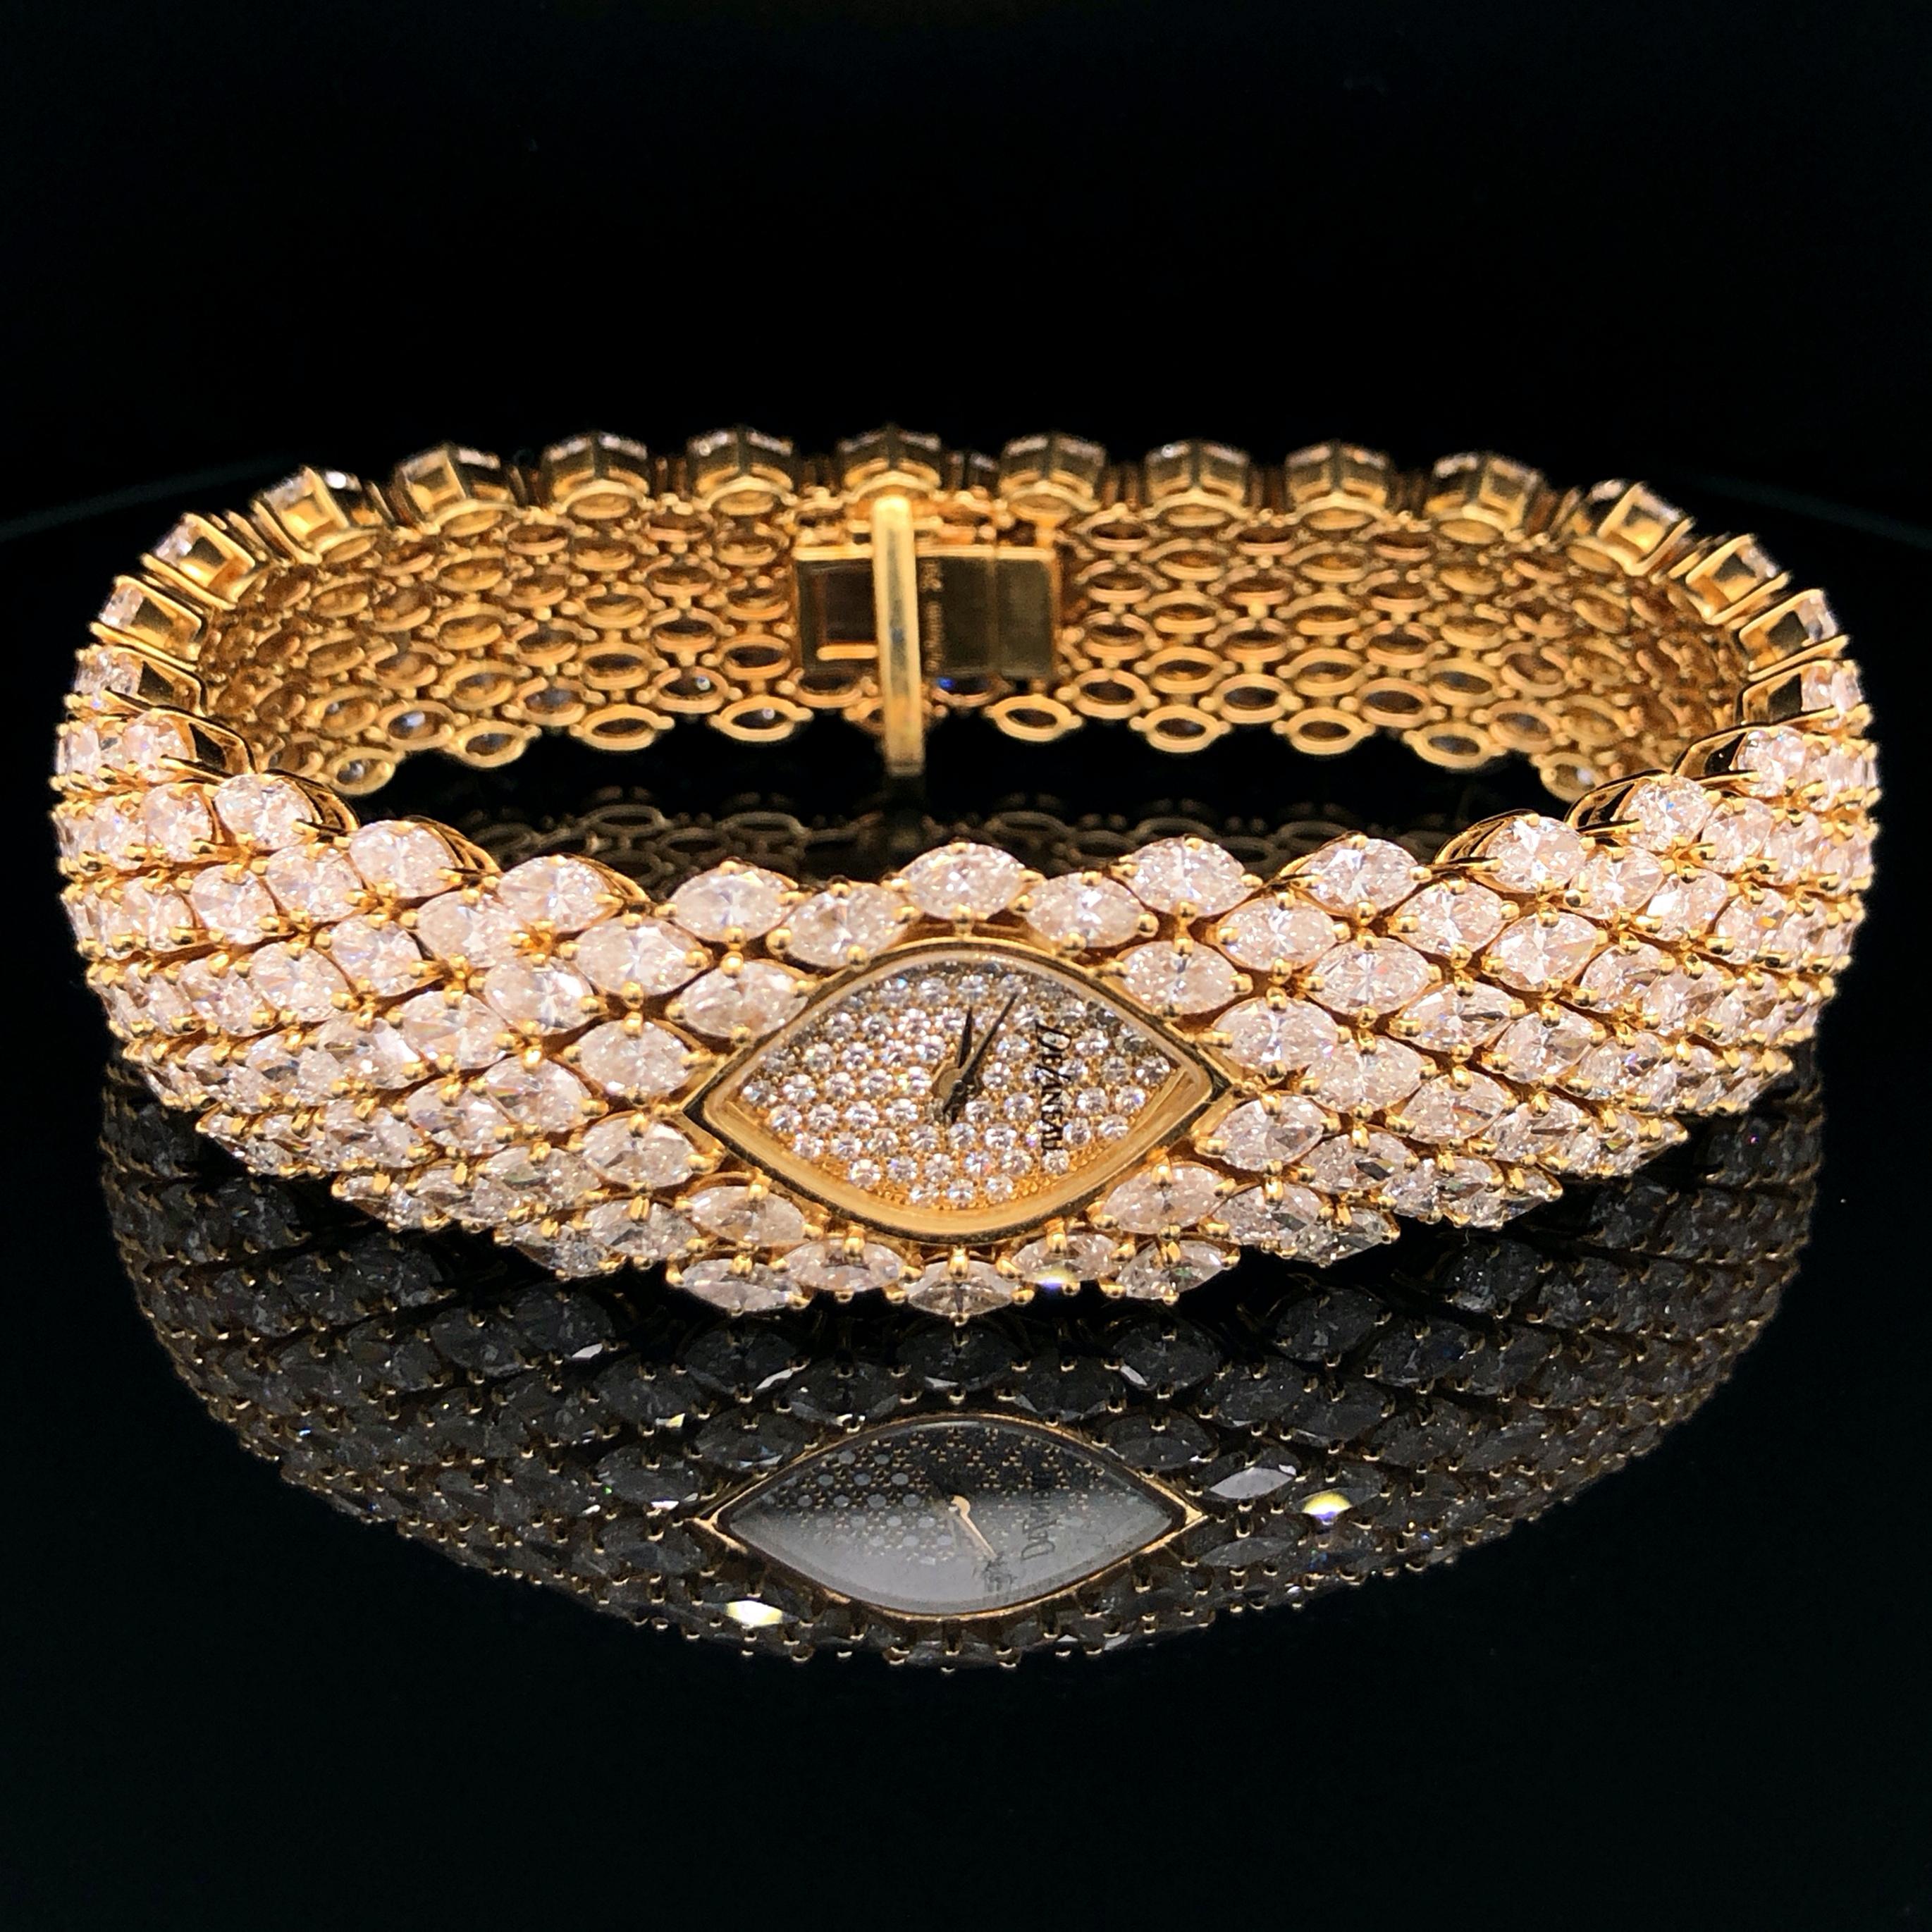 An exquisite and unique diamond watch in 18k yellow gold by DeLaneau. The whole watch is set with marquise cut diamonds of a very fine quality and single cut diamonds in the dial. The total diamond weight is approximately 35 carats. The